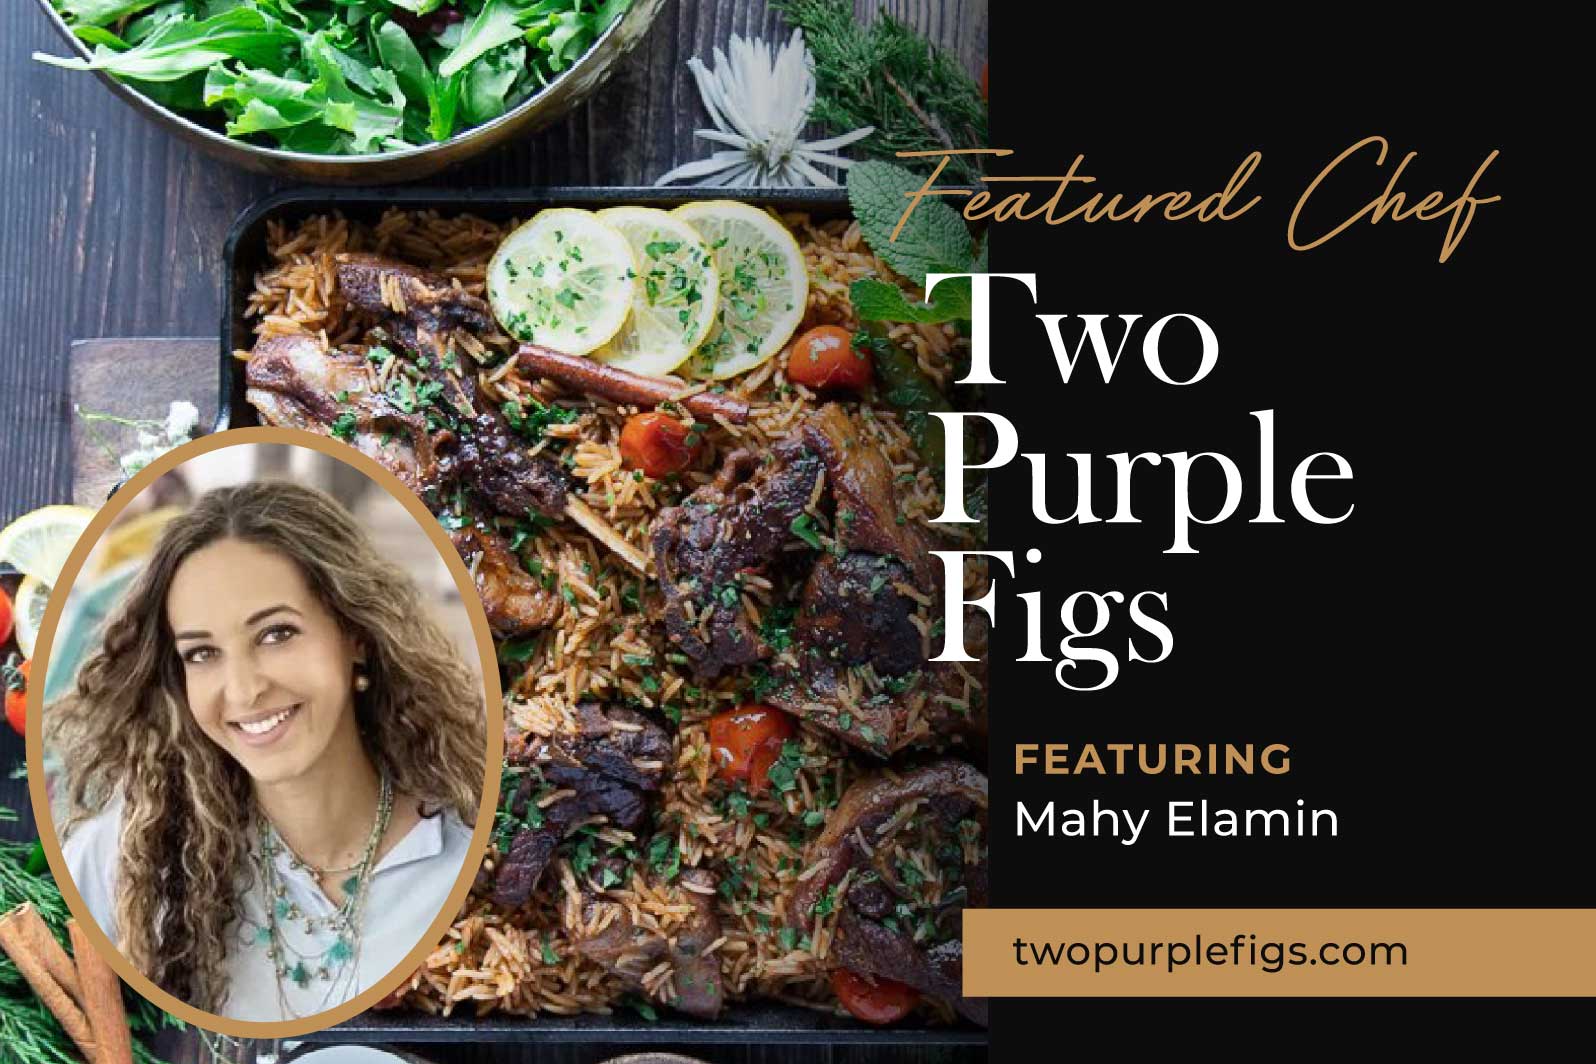 featured image of Two Purple Figs and Chef Mahy Elamin